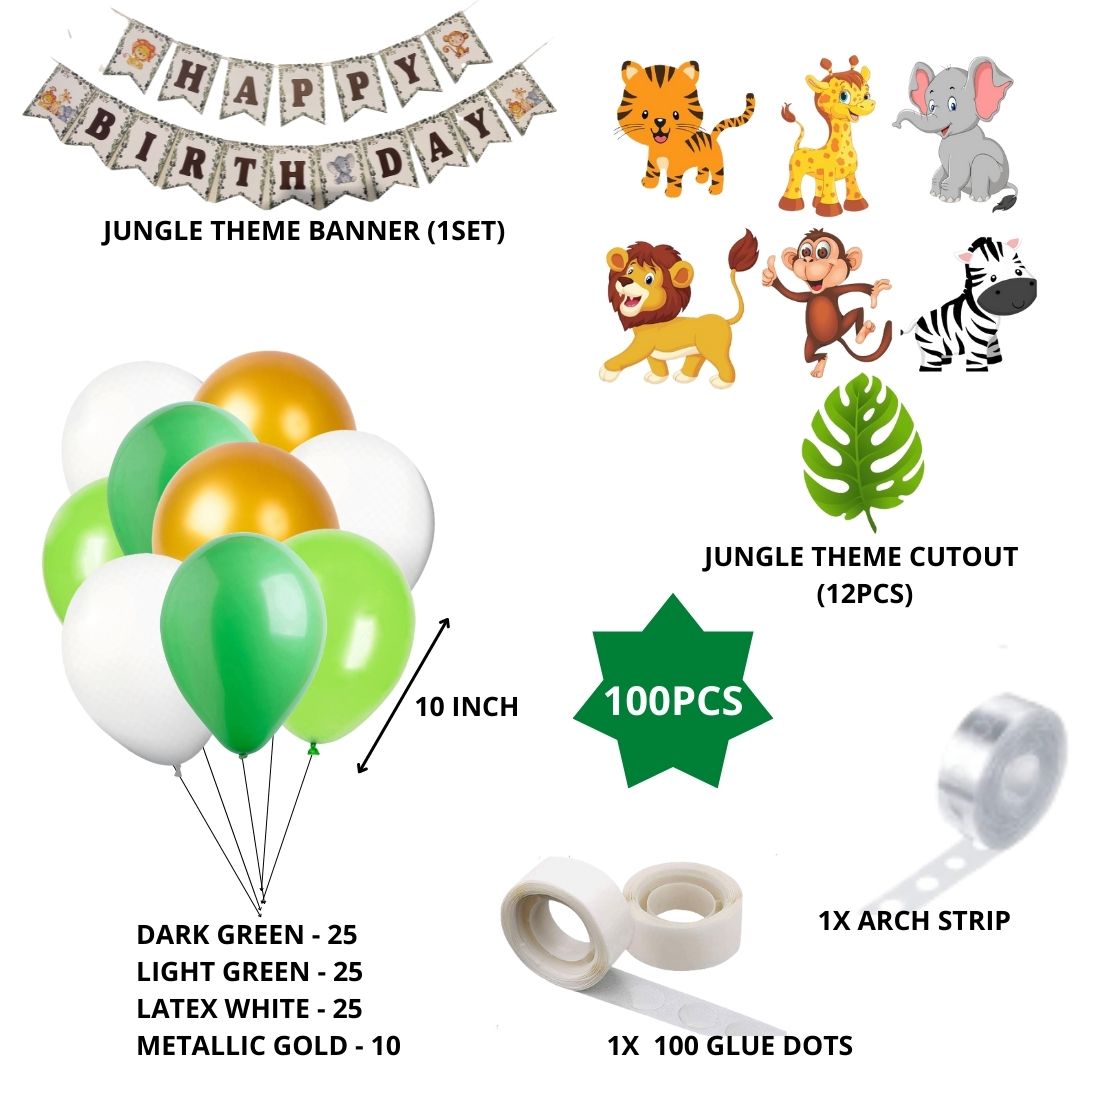 Jungle Theme Birthday Decorations For Kids